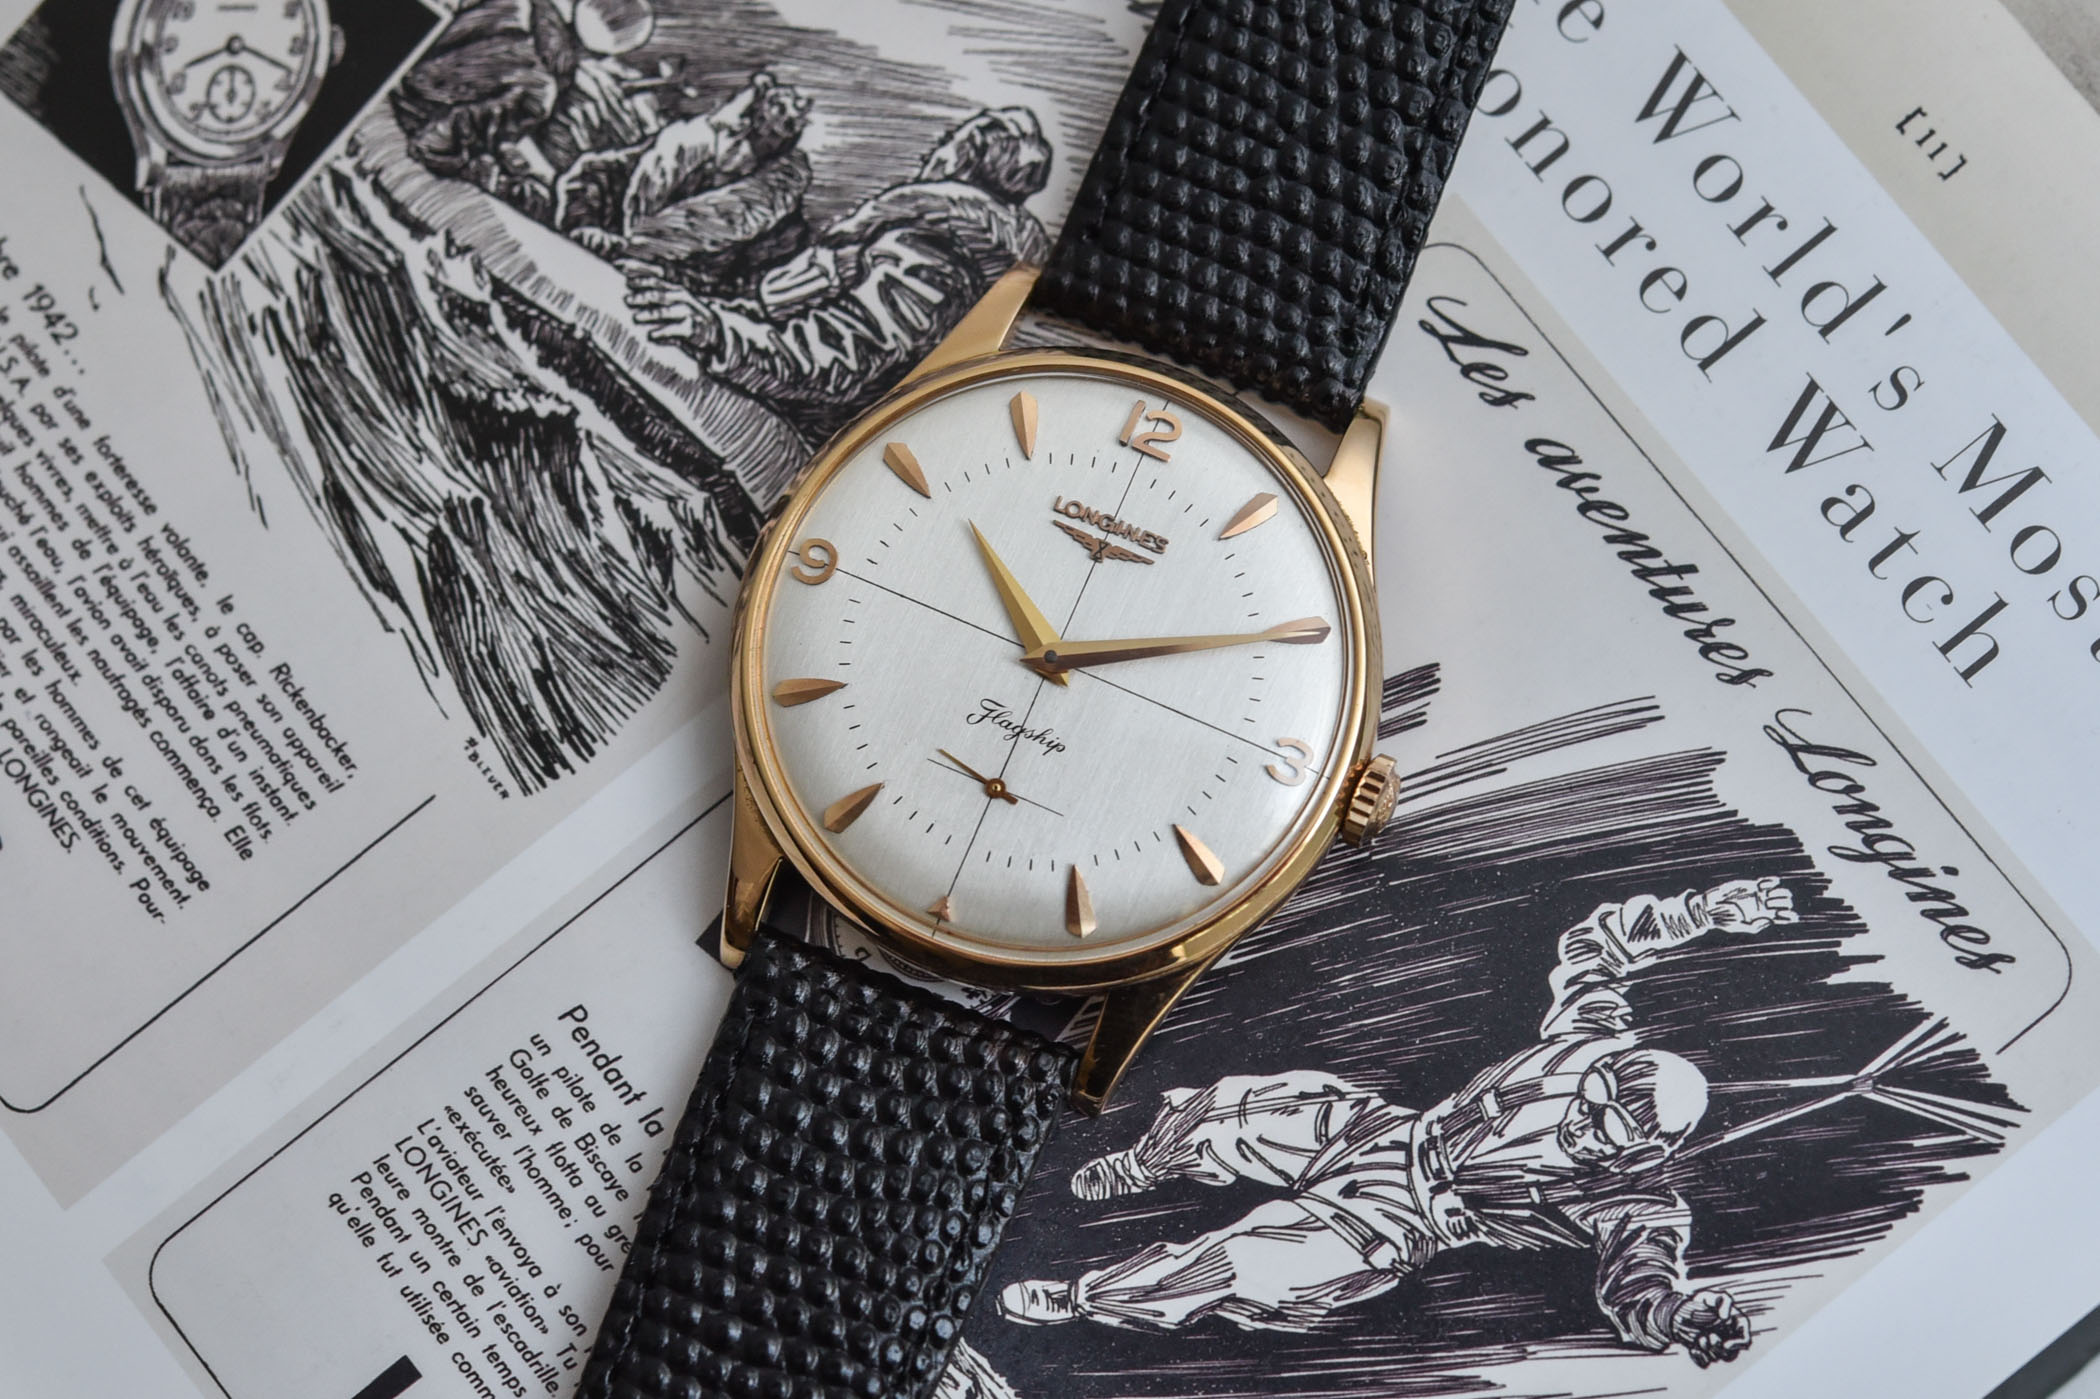 12 Best Vintage Watches For Men 2018 - Stylish Vintage Watches Available Now-hkpdtq2012.edu.vn